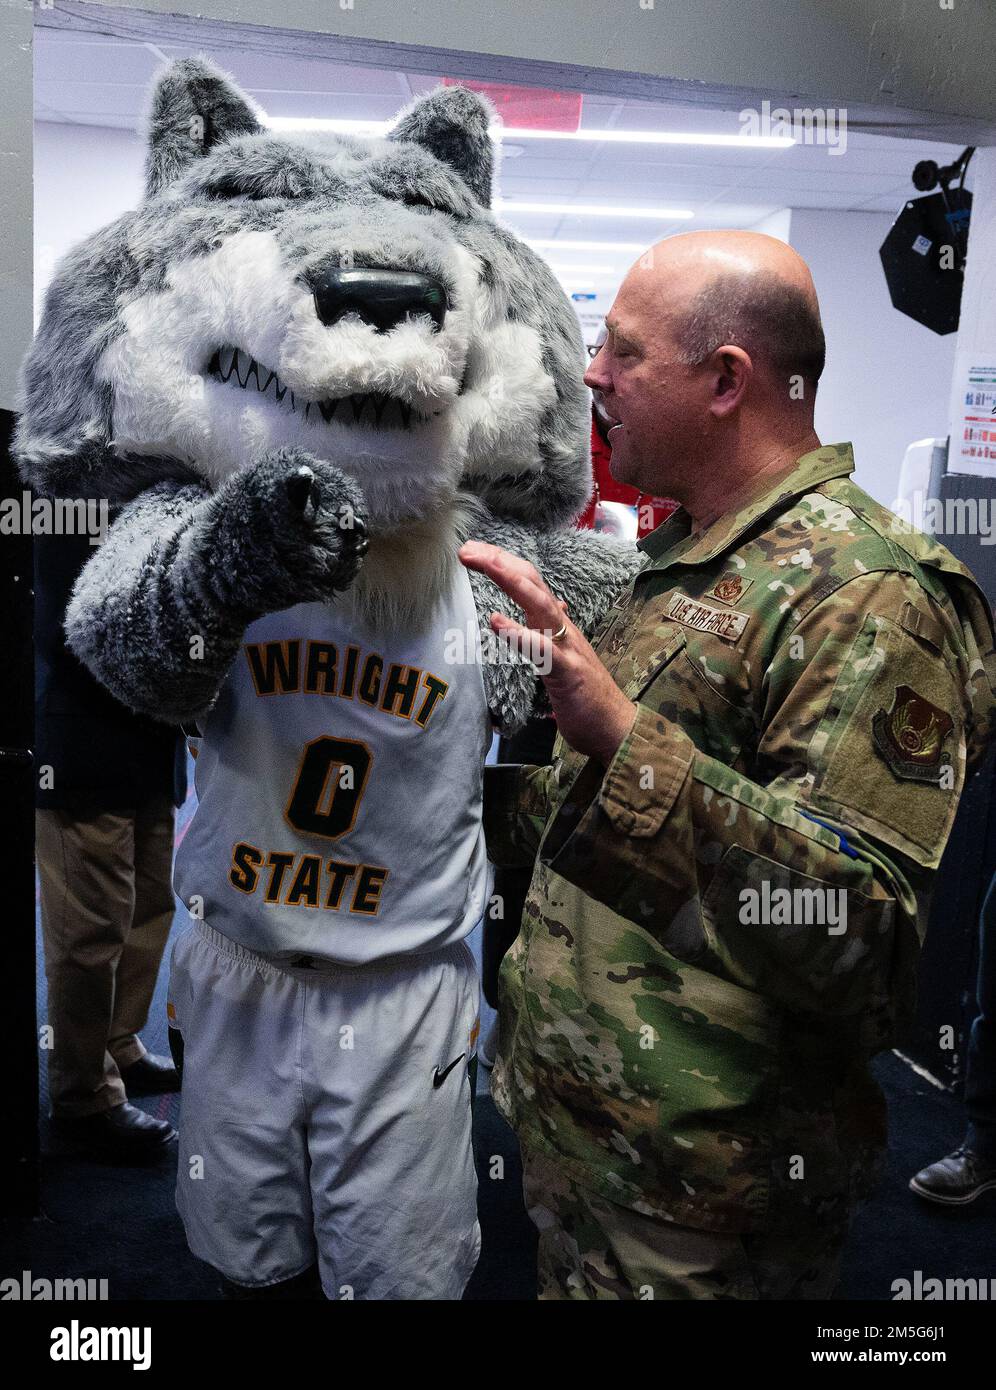 Wright State mascot Rowdy Raider and Col. Patrick Miller, 88th Air Base Wing and Wright-Patterson Air Force Base commander, greet each other March 16, 2022, prior to the opening ceremony of the NCAA men’s basketball tournament game between Wright State and Bryant. Wright State, a hometown team whose campus borders Wright-Patterson, went on to win the game and advance to the next round of tournament play. Stock Photo